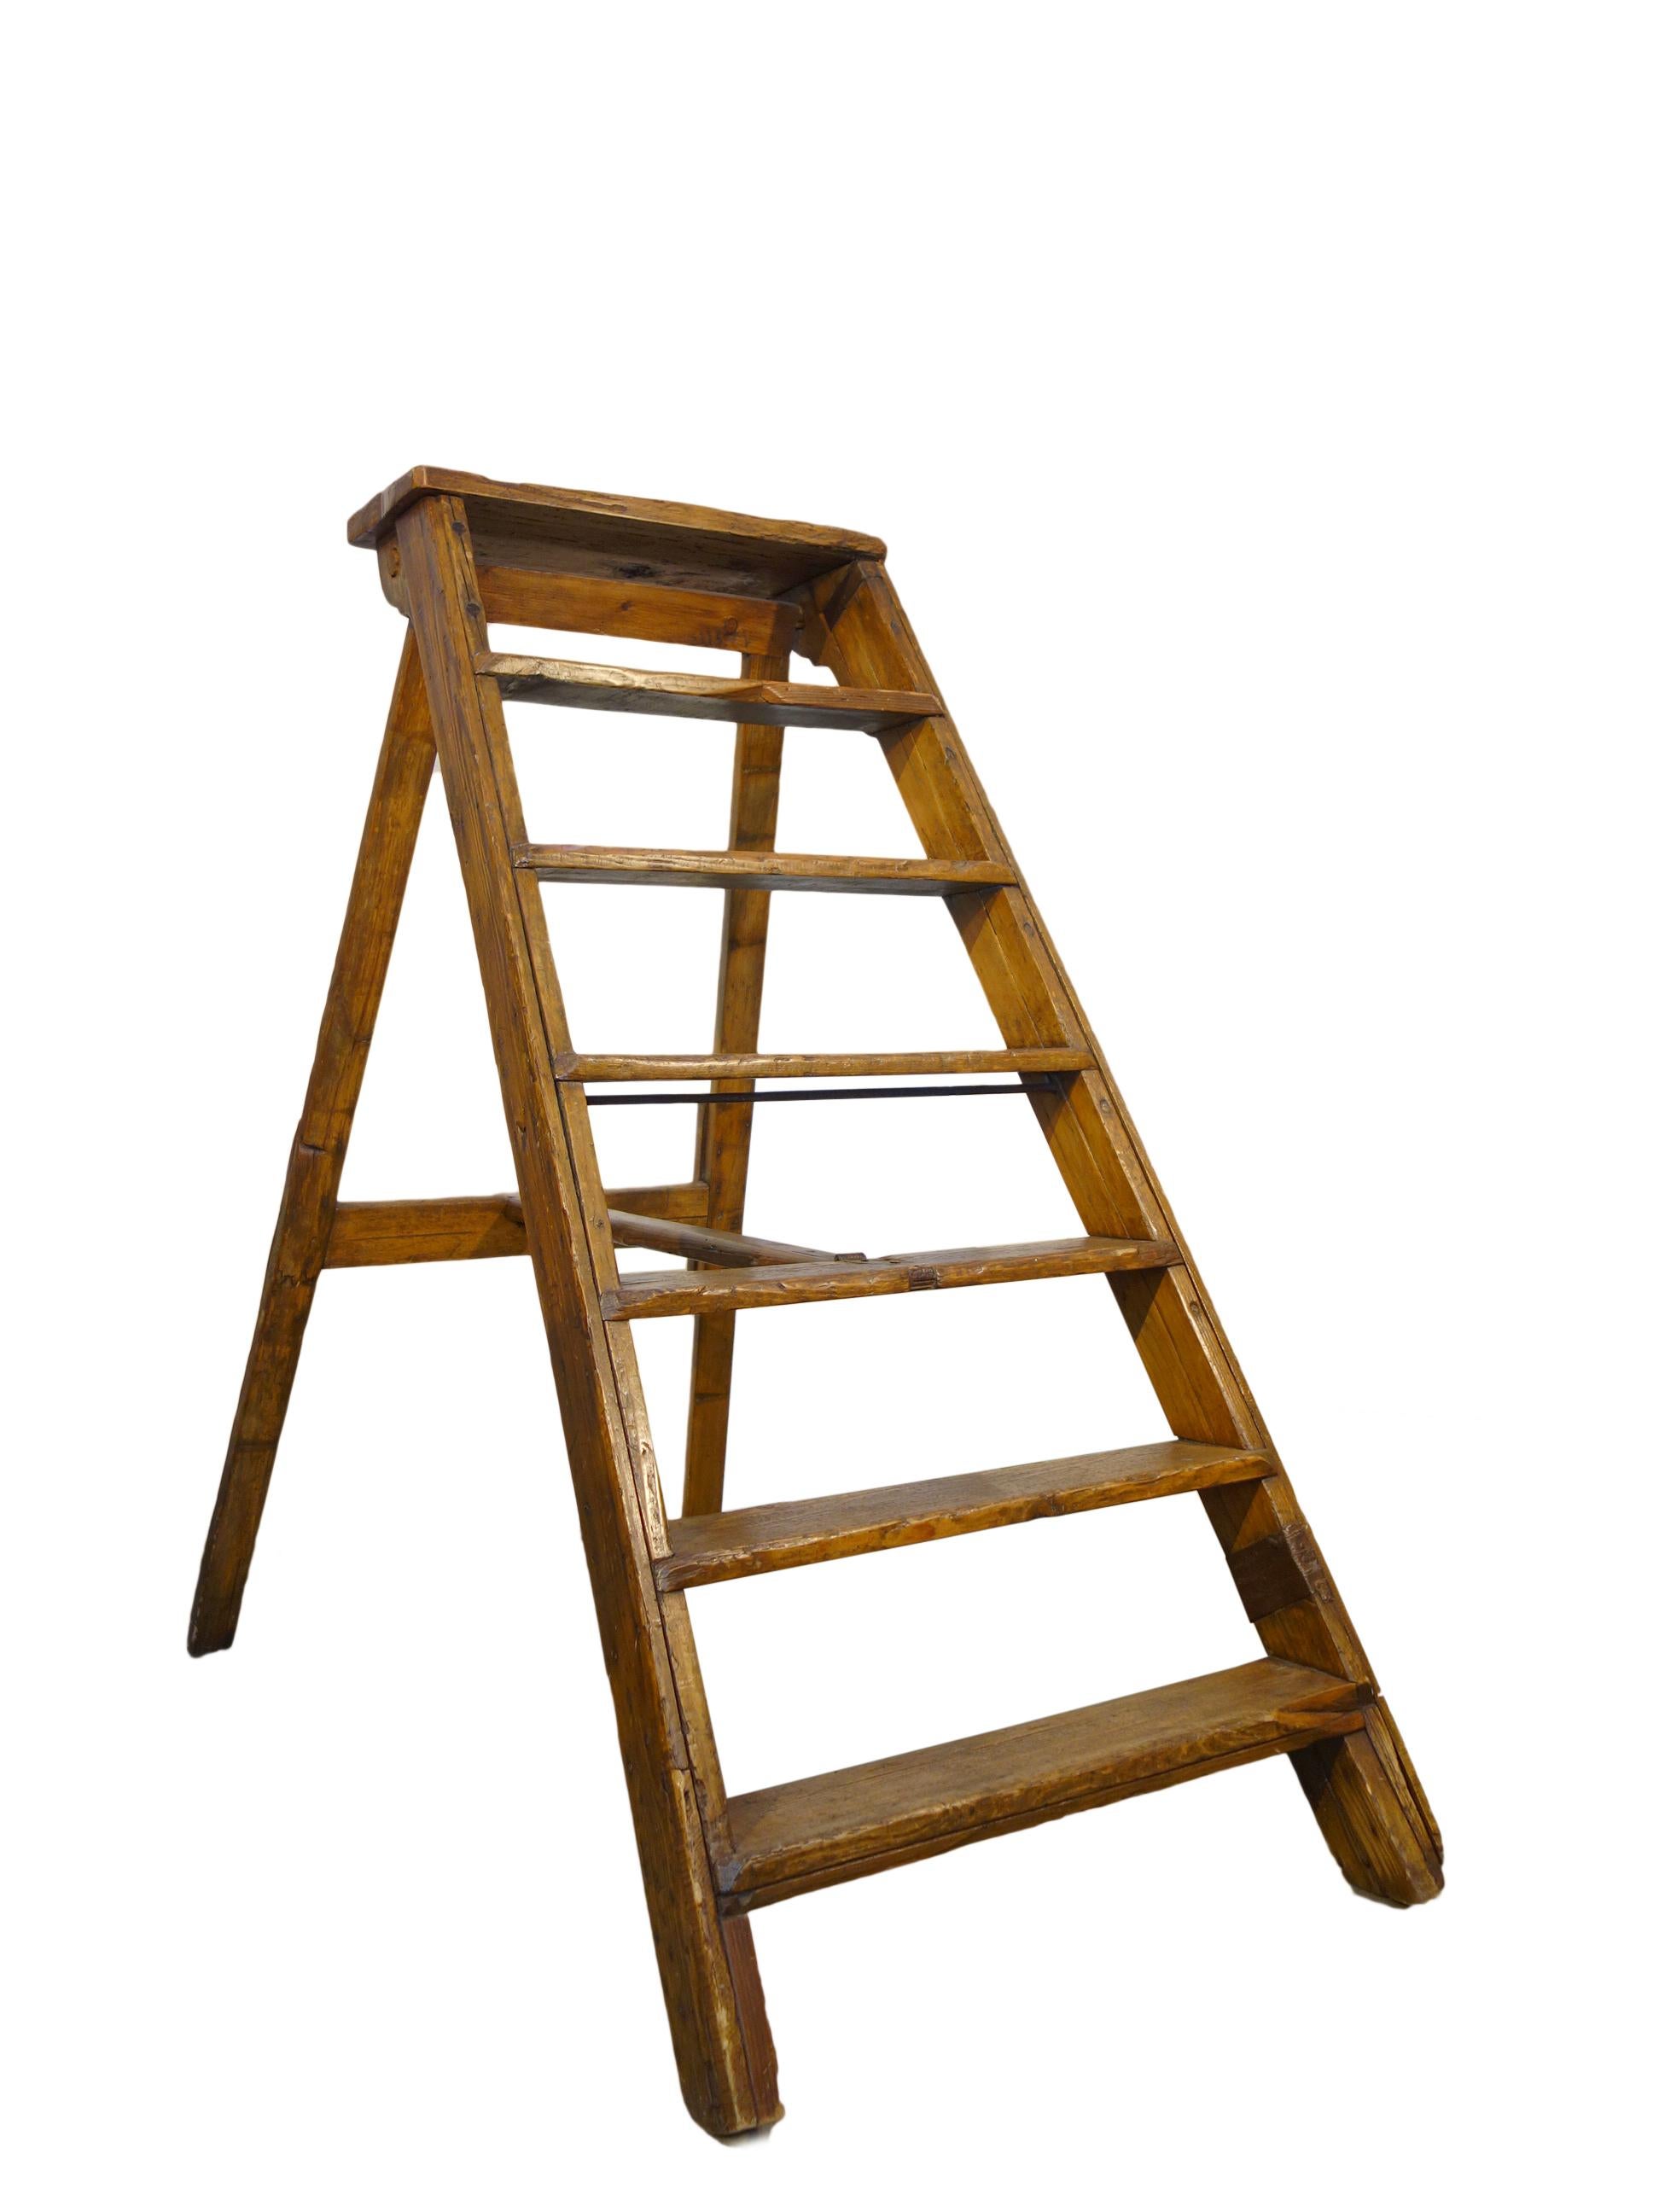 19th century Italian handcrafted rustic wood folding library stair ladder, Tuscany, circa 1860.
Measures extended: 52” H x 29” W x 53” D
Closed 64” H x 29” W x 9” D.
 